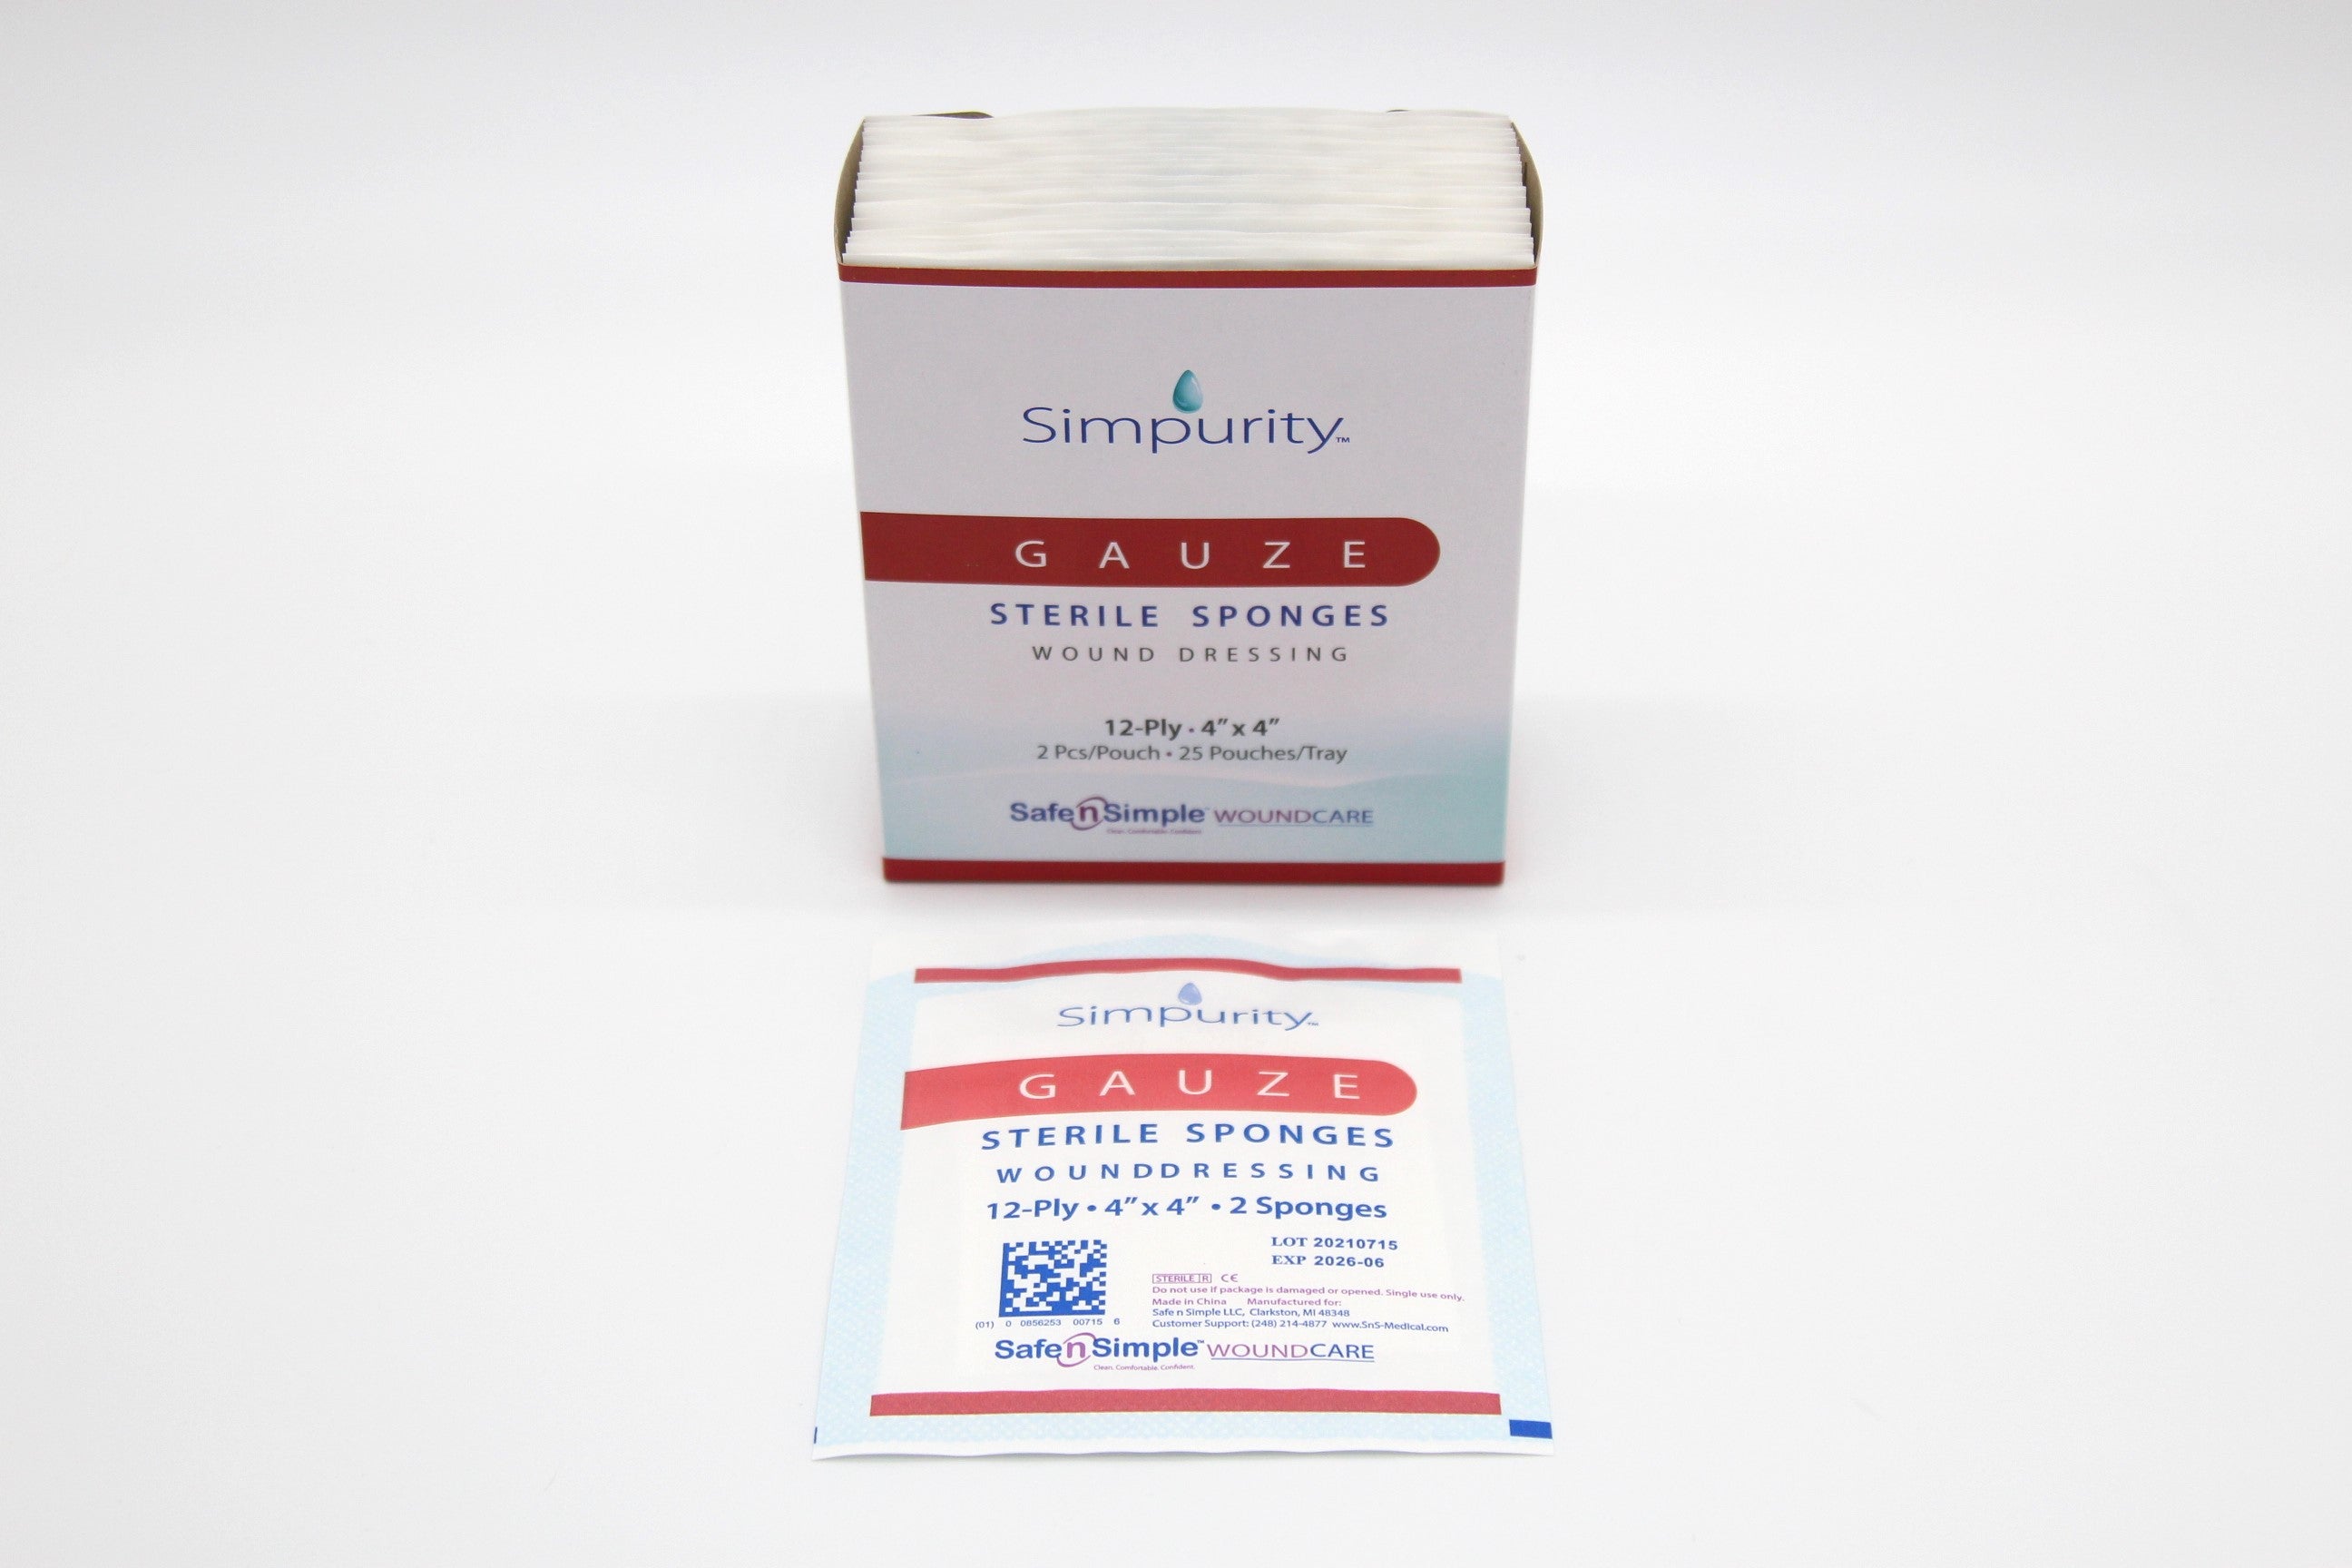 Super Absorbent Pads  Wound Care Dressing – SNS Medical